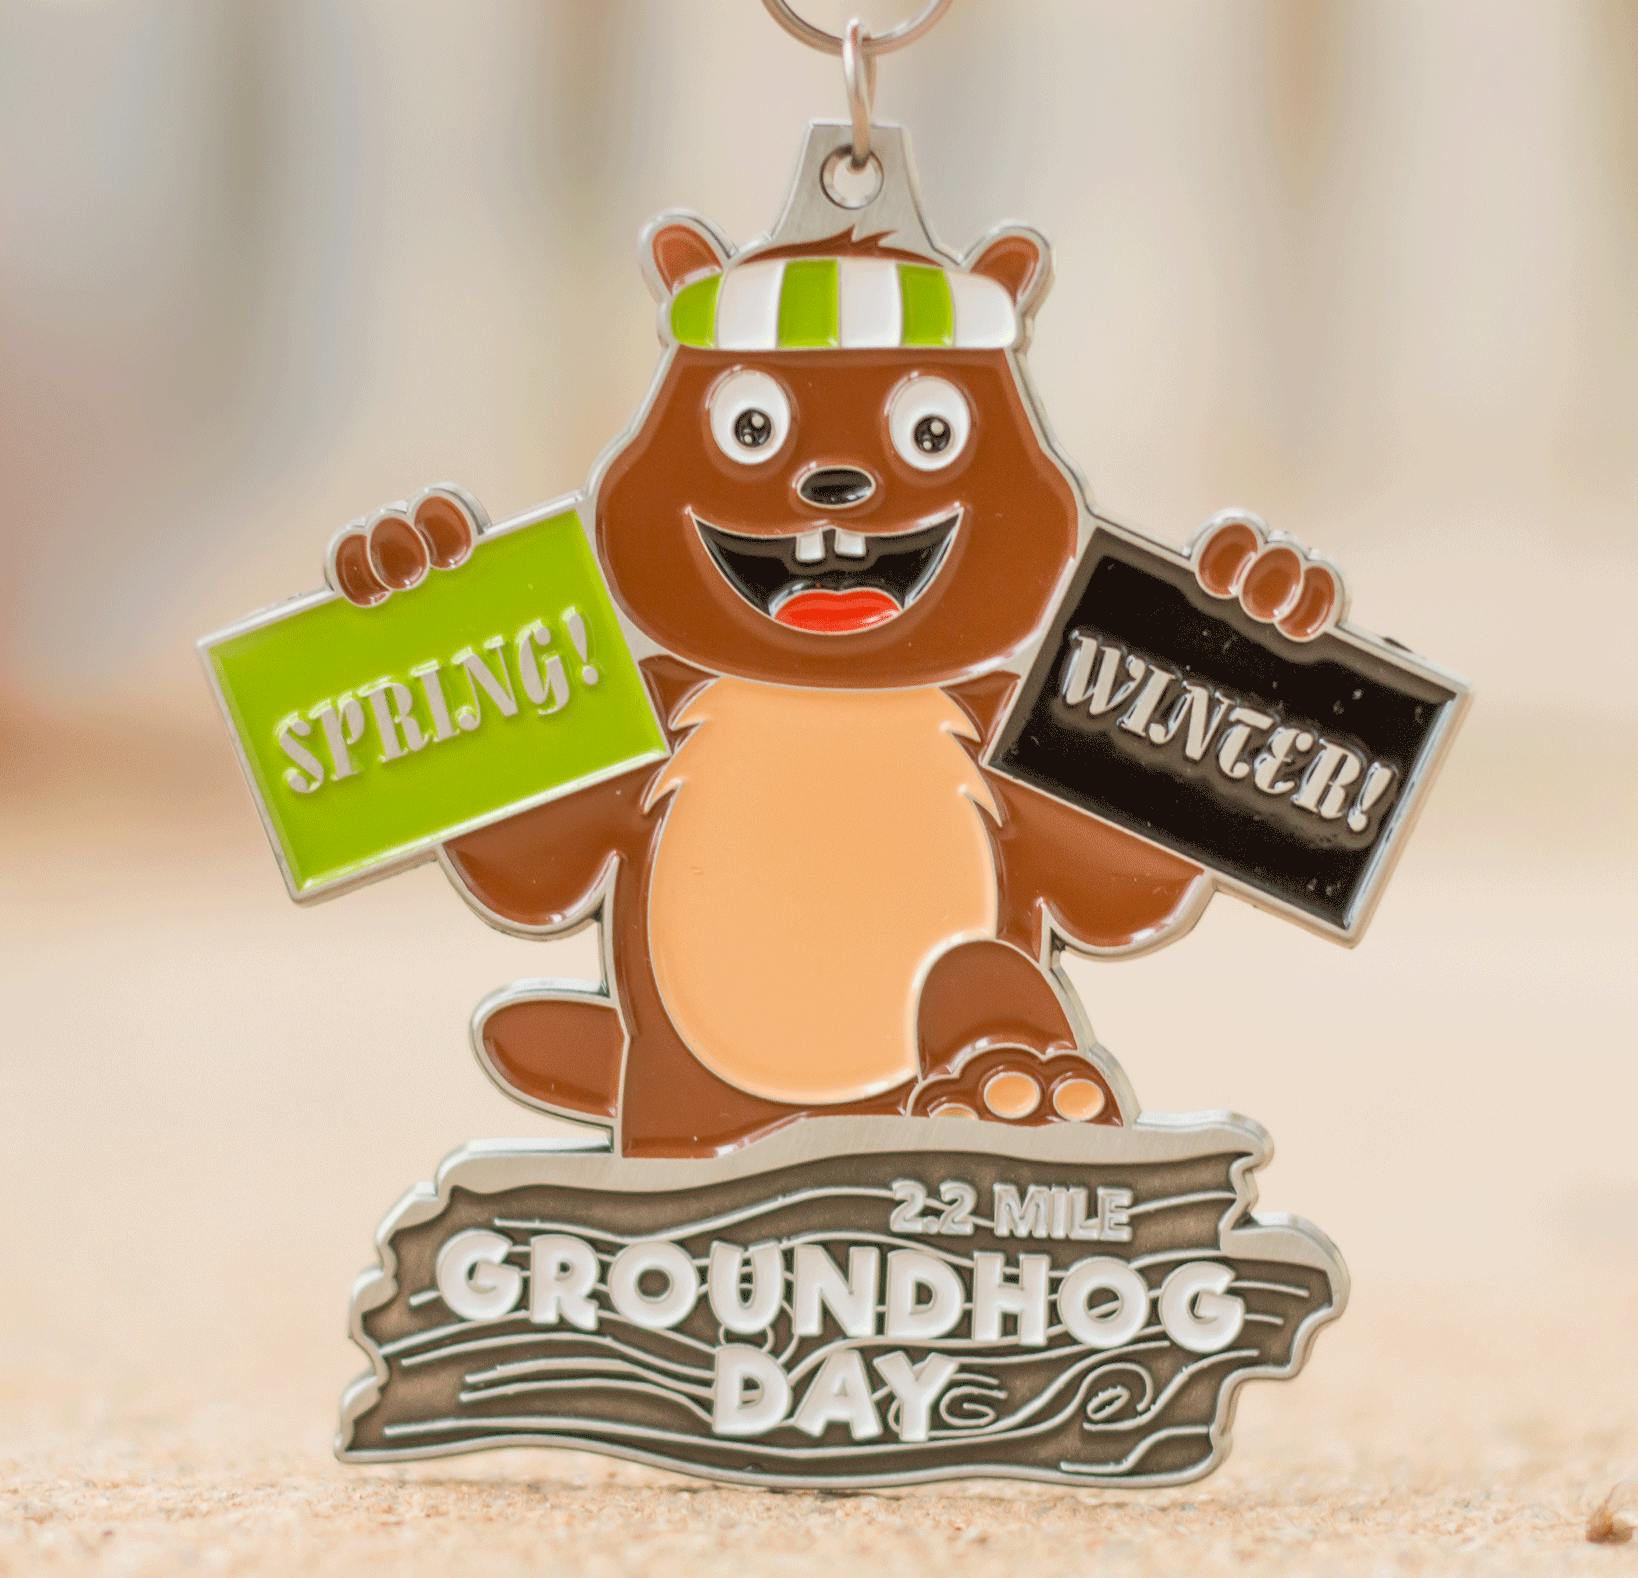 Now Only $8.00! 2018 Groundhog Day 2.2 Mile- Minneapolis